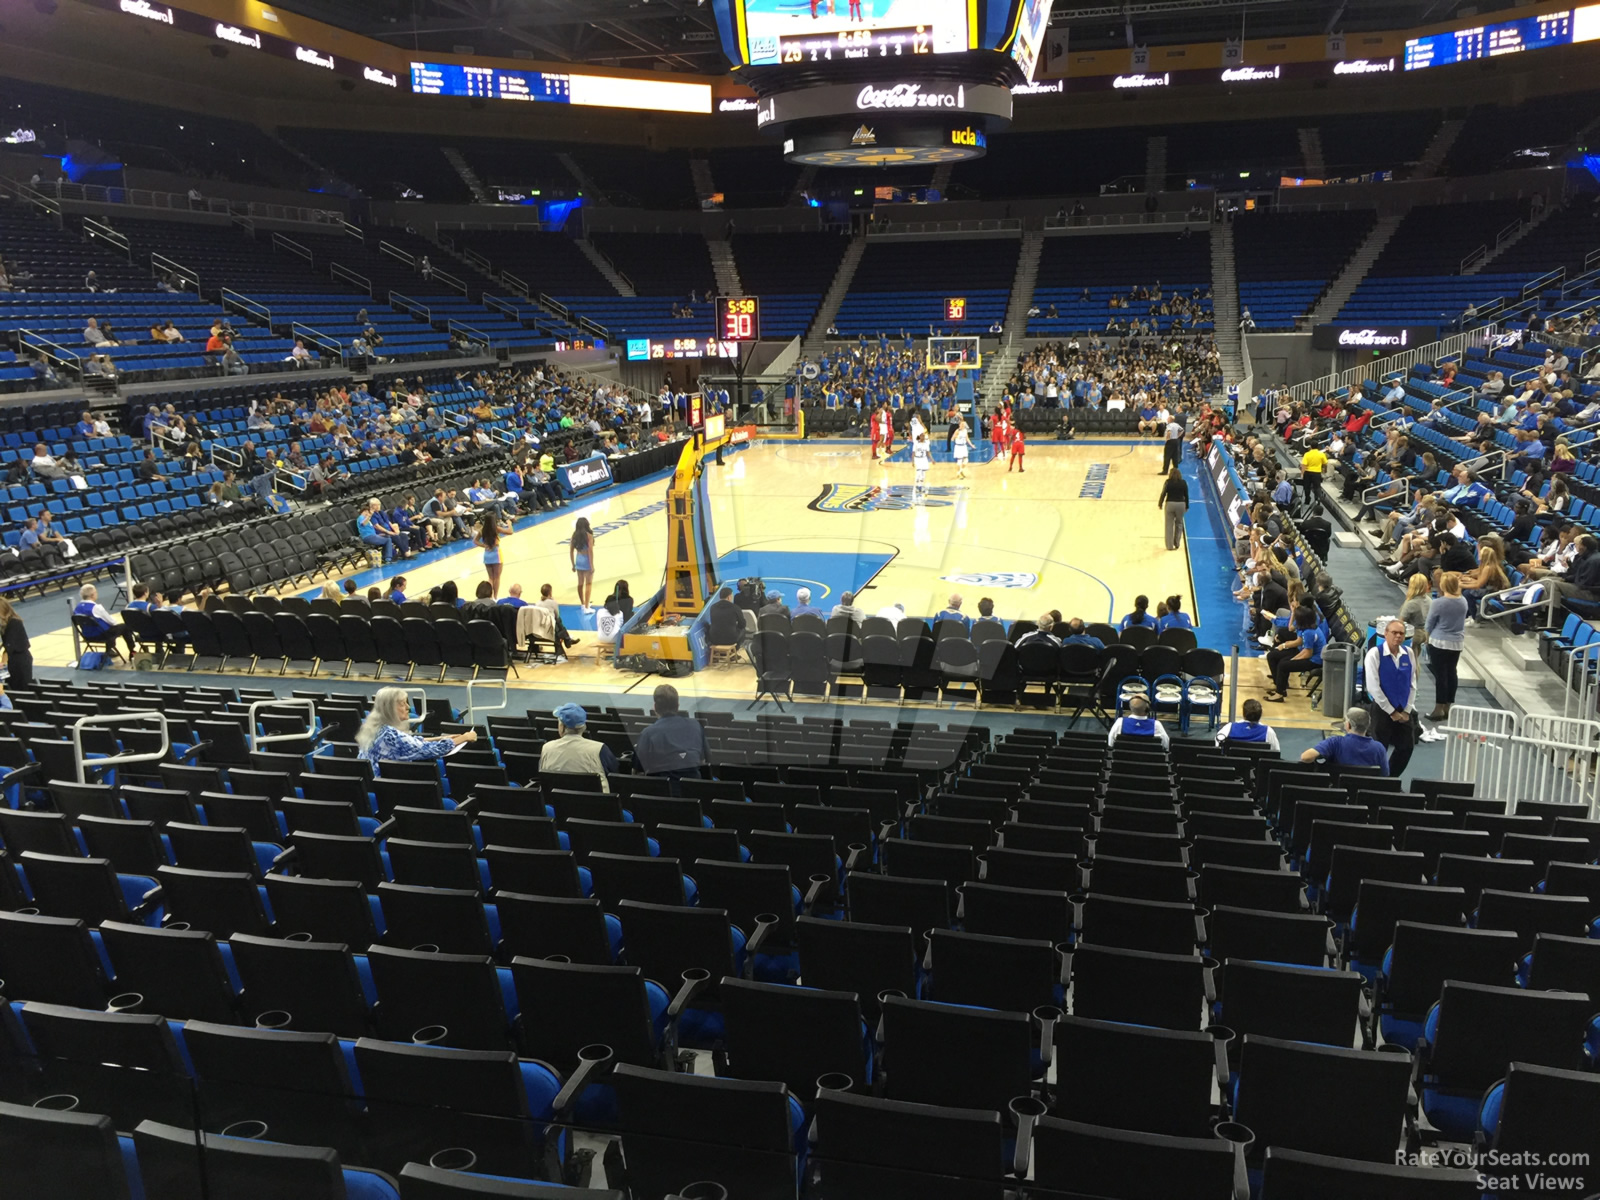 section 108, row 3 seat view  - pauley pavilion